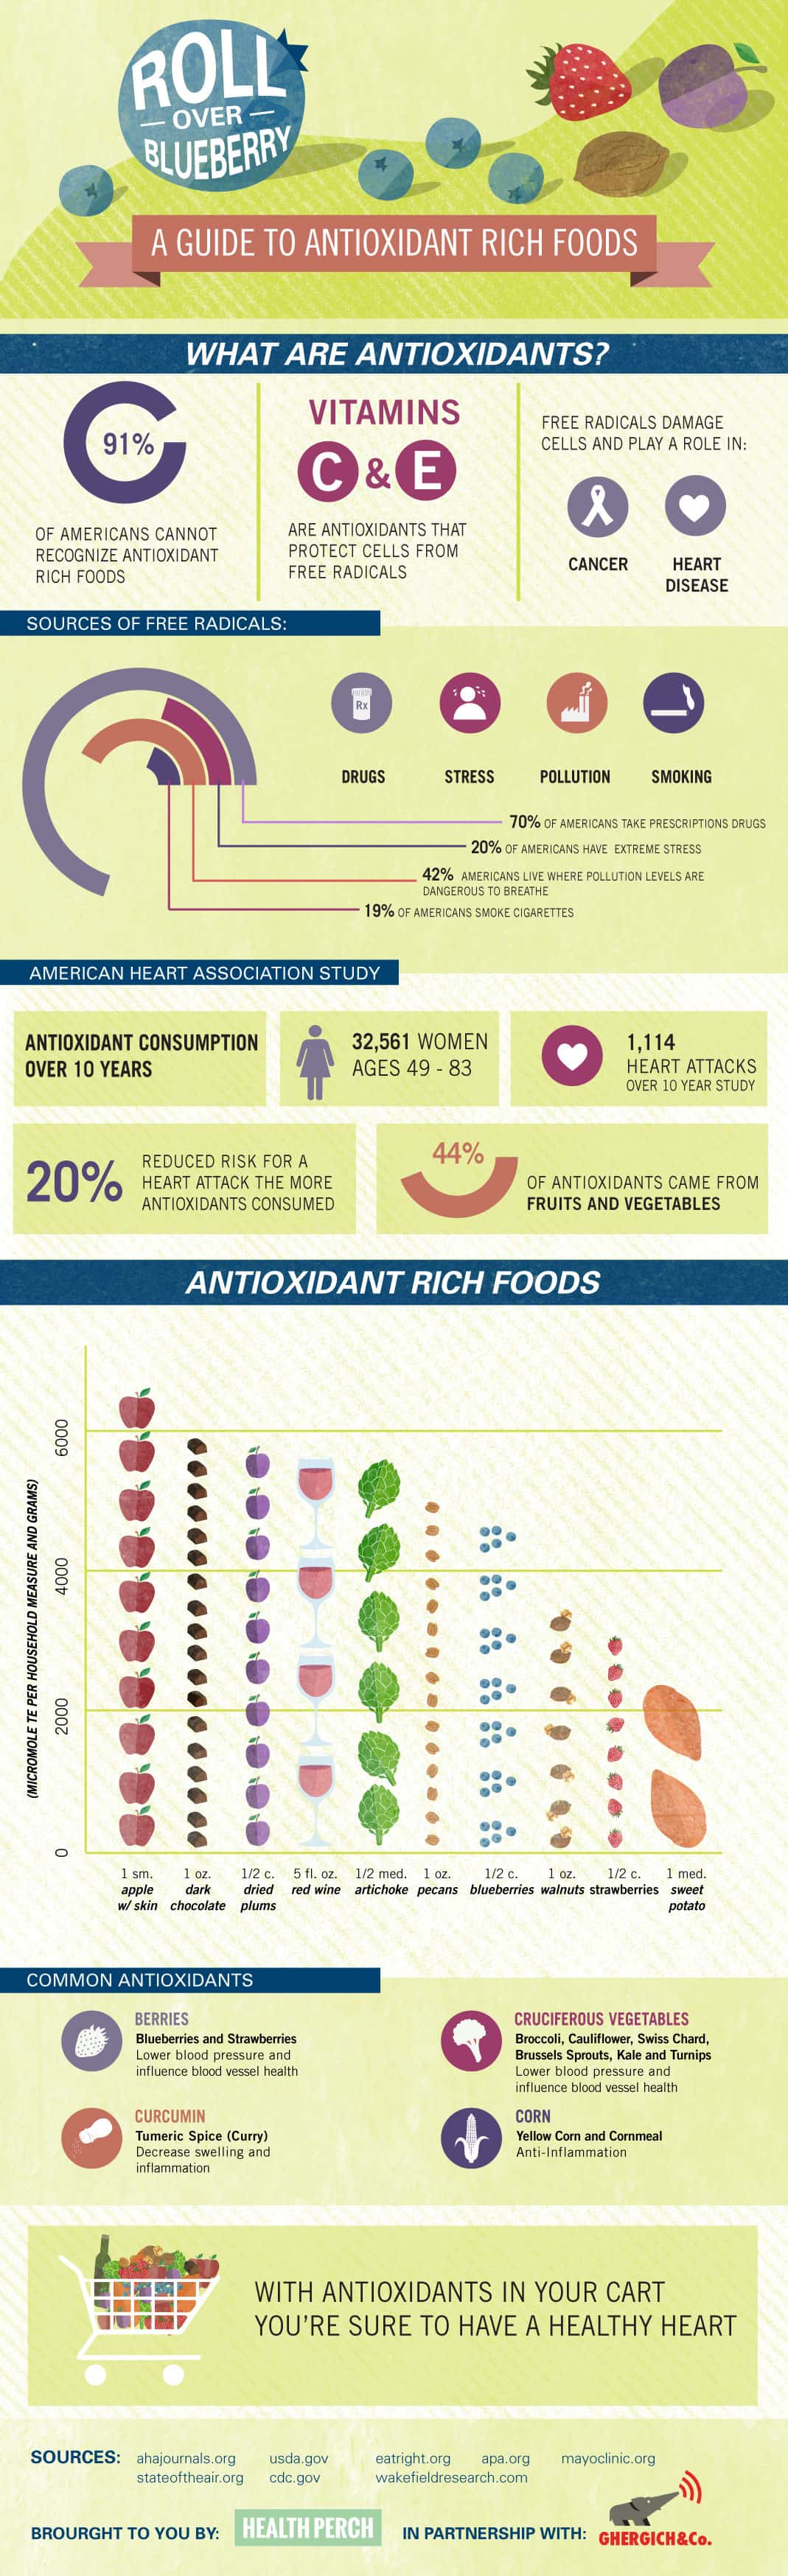 Roll Over Blueberry - A Guide To Antioxidants - Infographic